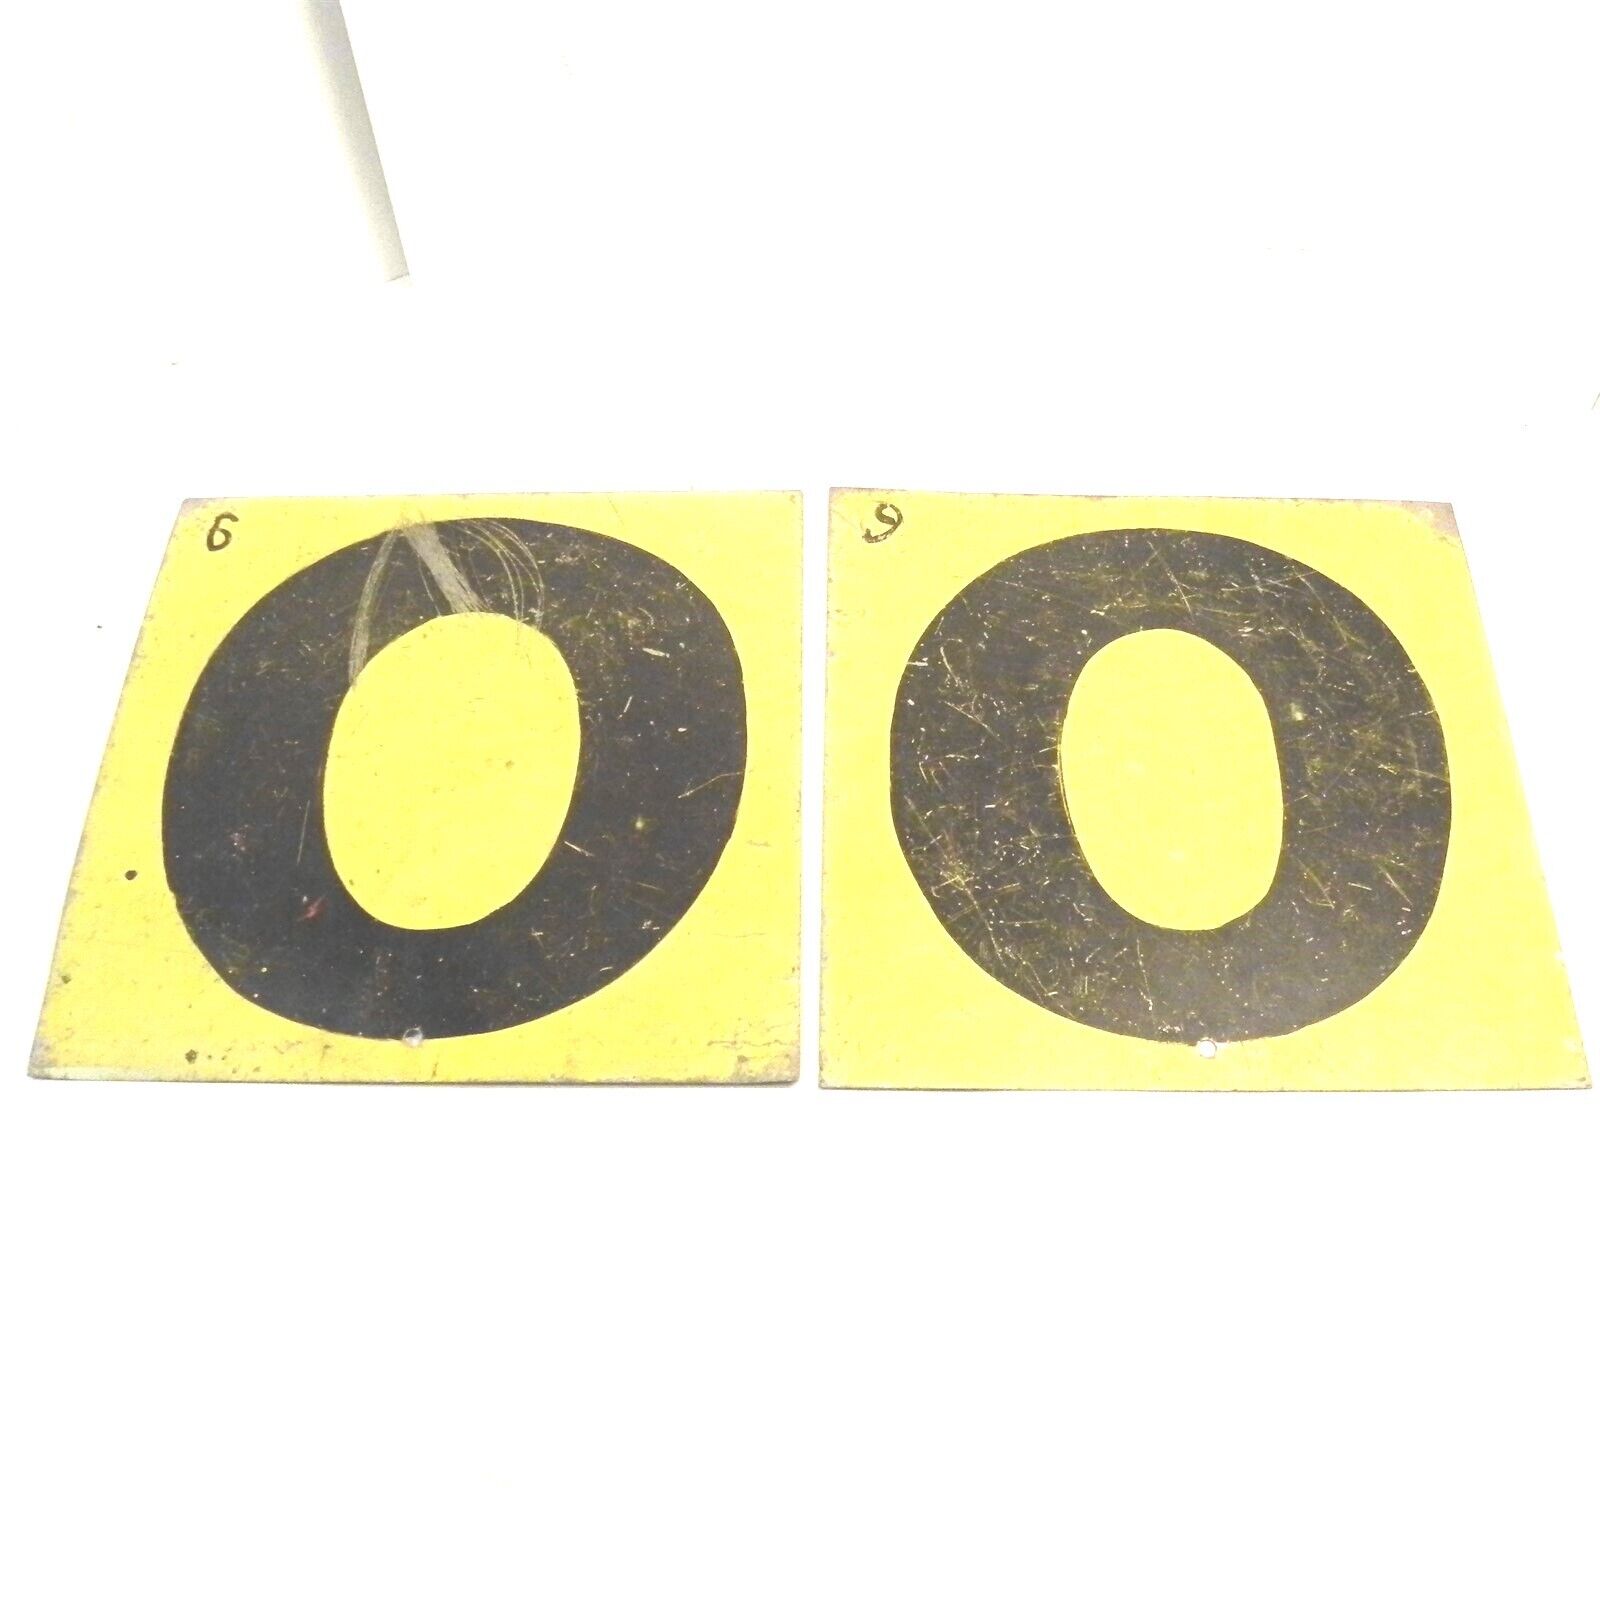 VINTAGE 1930's 40's GAS SERVICE STATION METAL SIGN NUMBERS DOUBLE SIDED 9 0 USED